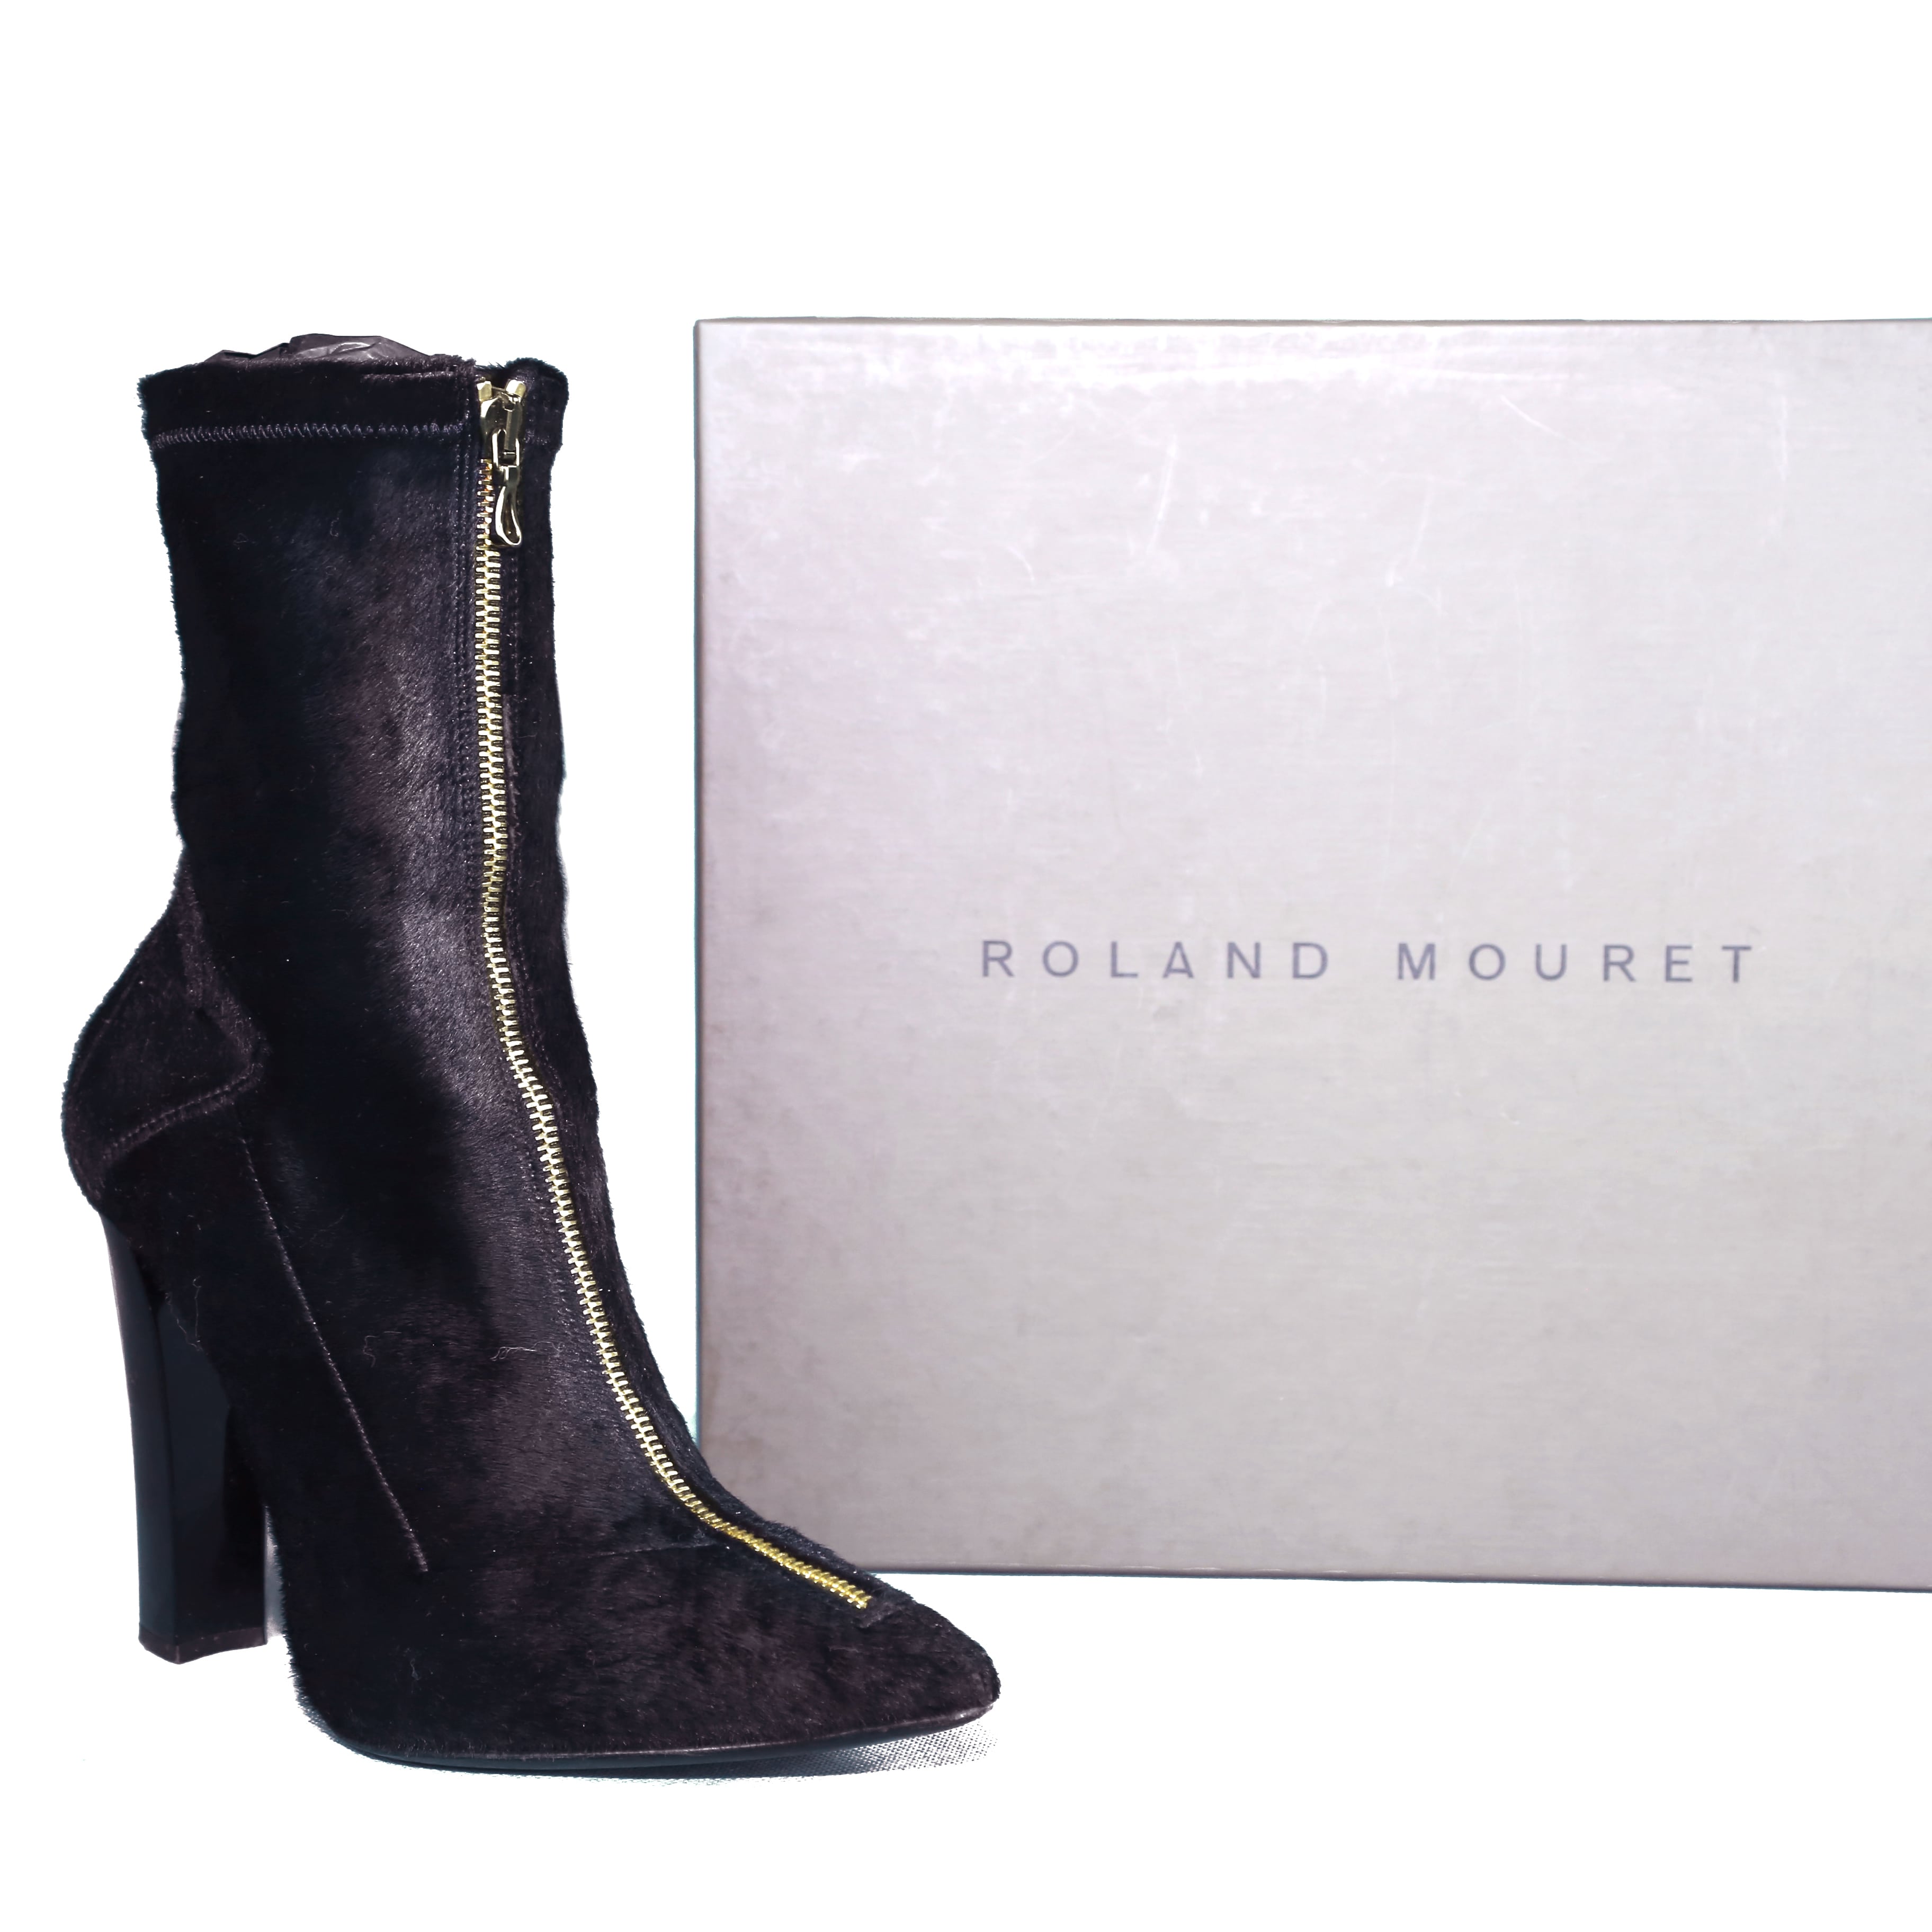 Roland Mouret is a French-born, London-based designer whose eponymous label launched in 1998. - Image 3 of 4